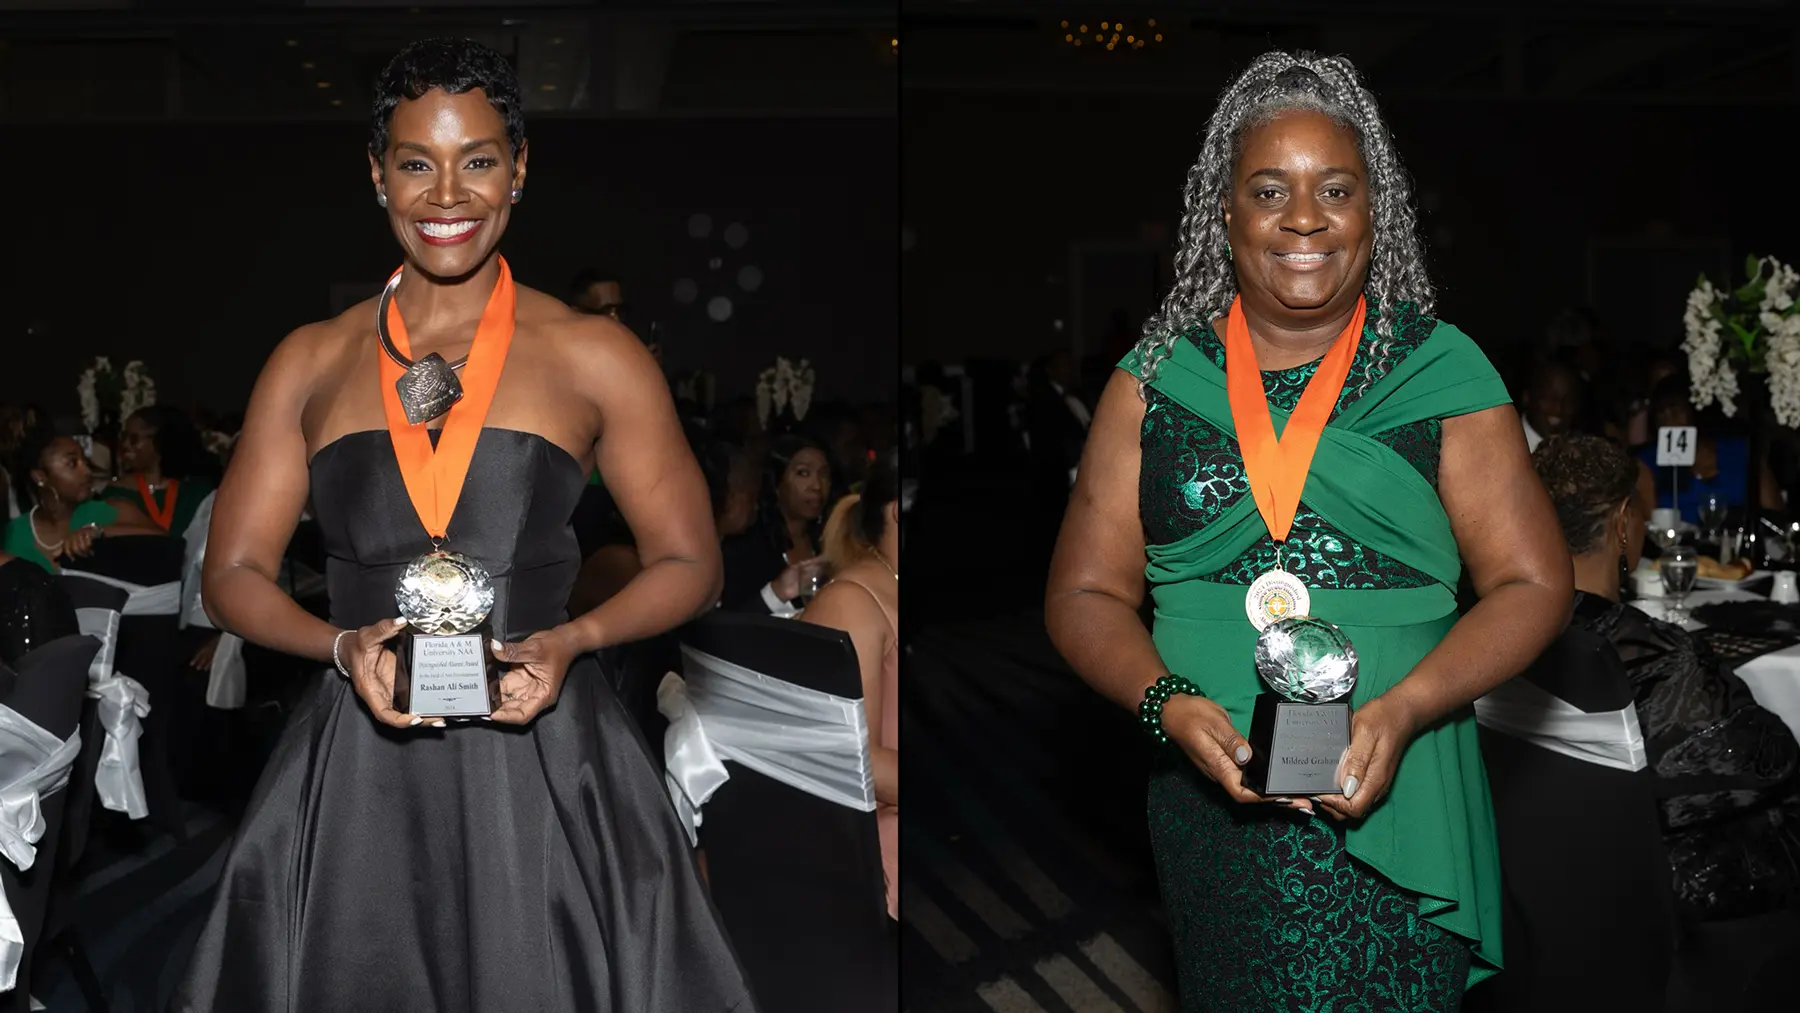 Rashan Ali (left) and Mildred Graham (right) are awarded with the Distinguished Alumni Award during the FAMU National Alumni Association Convention in Tampa.